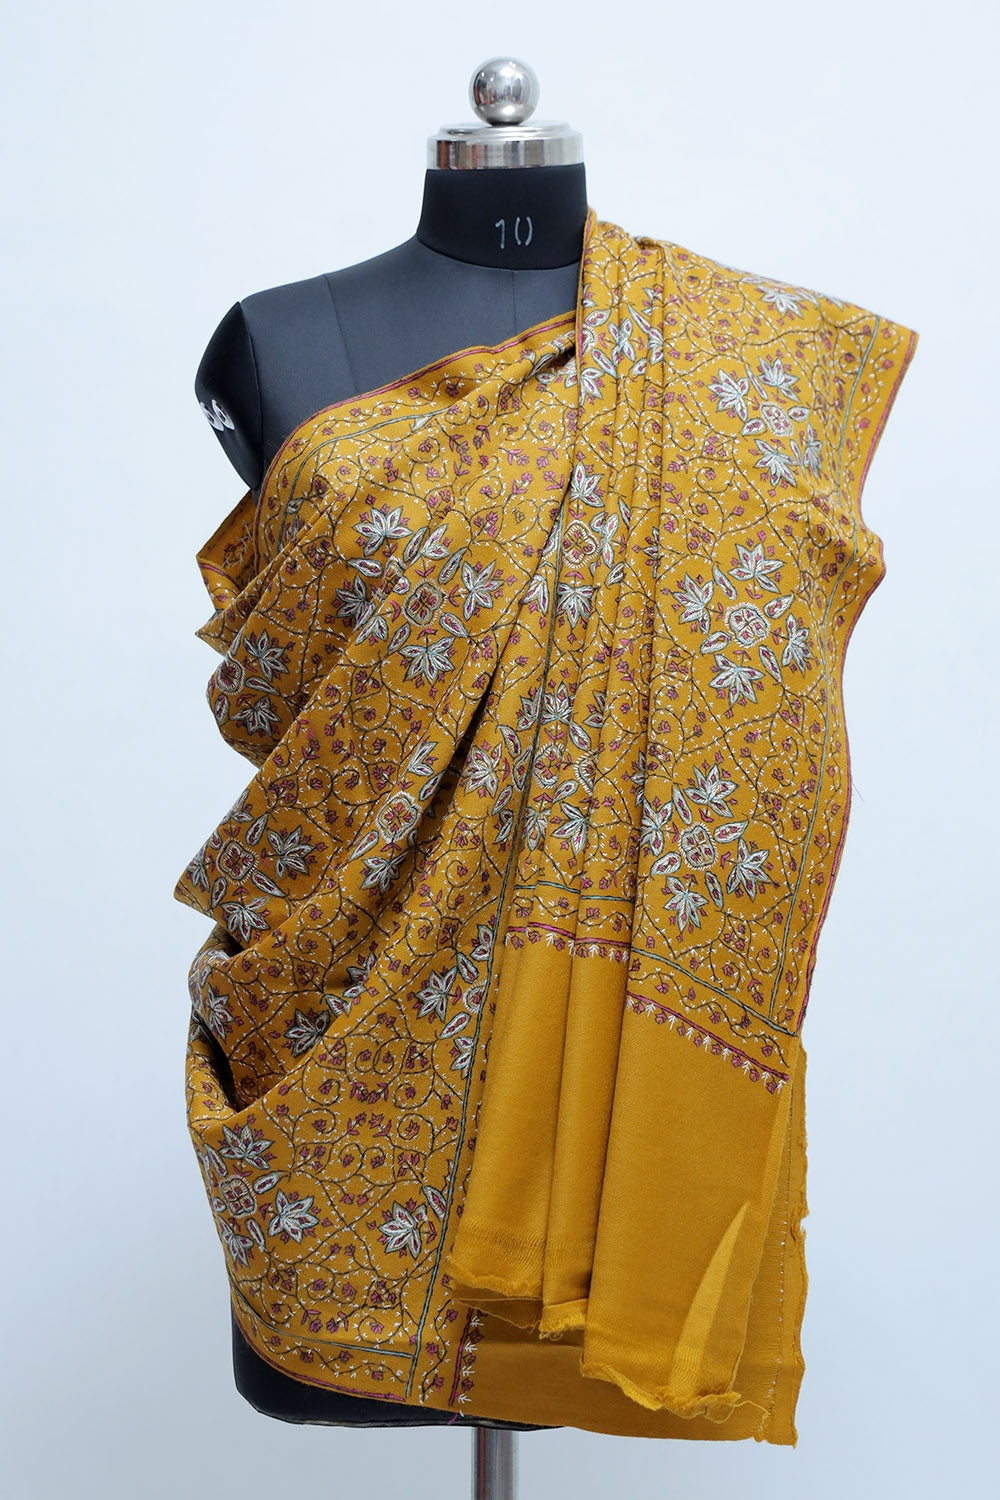 Mustard Colour Sozni Shawl With Richly Embroidered Border